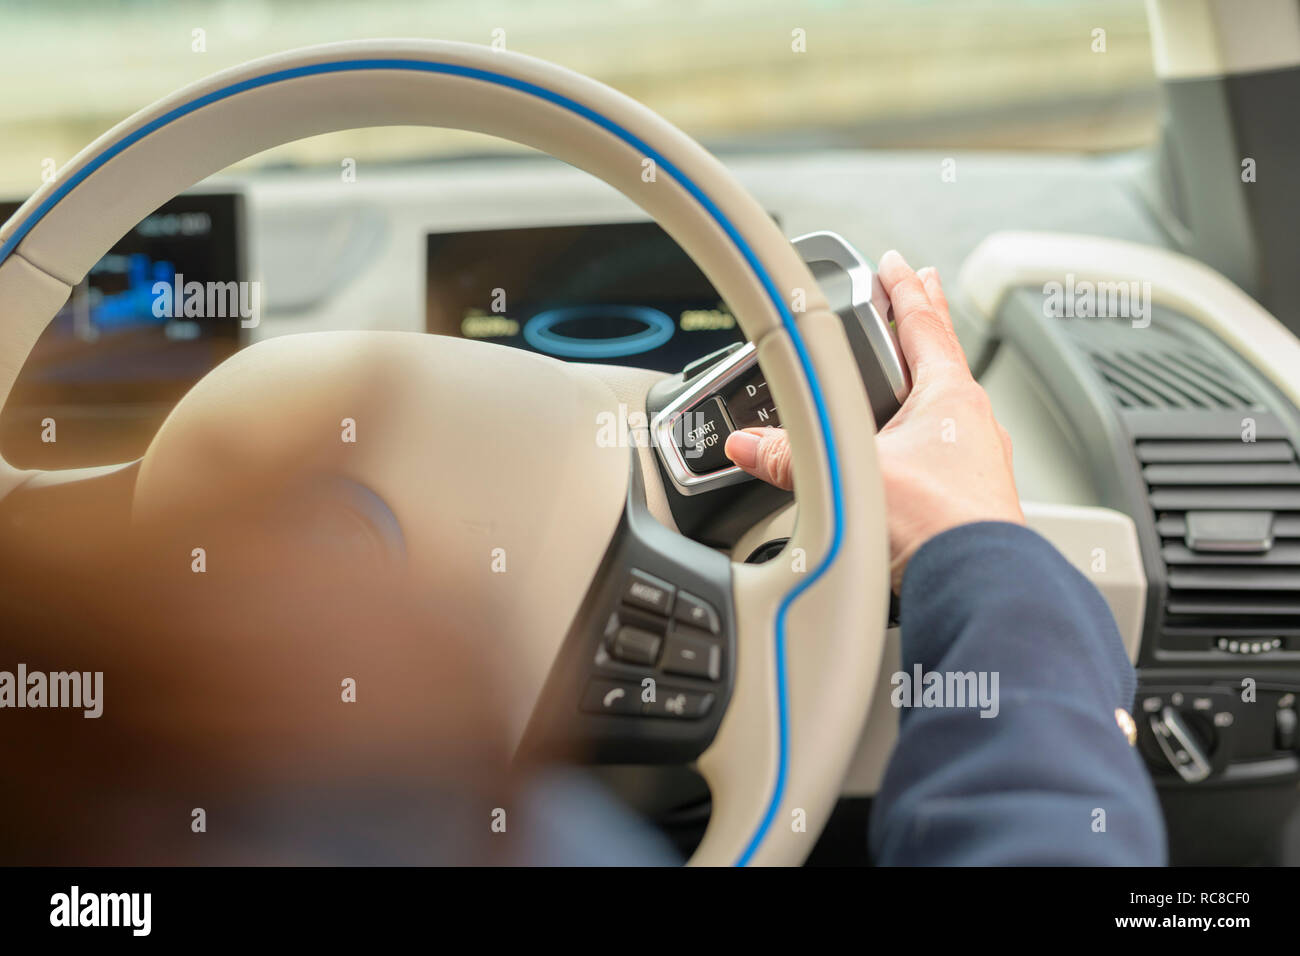 Woman pressing start button on electric car Stock Photo